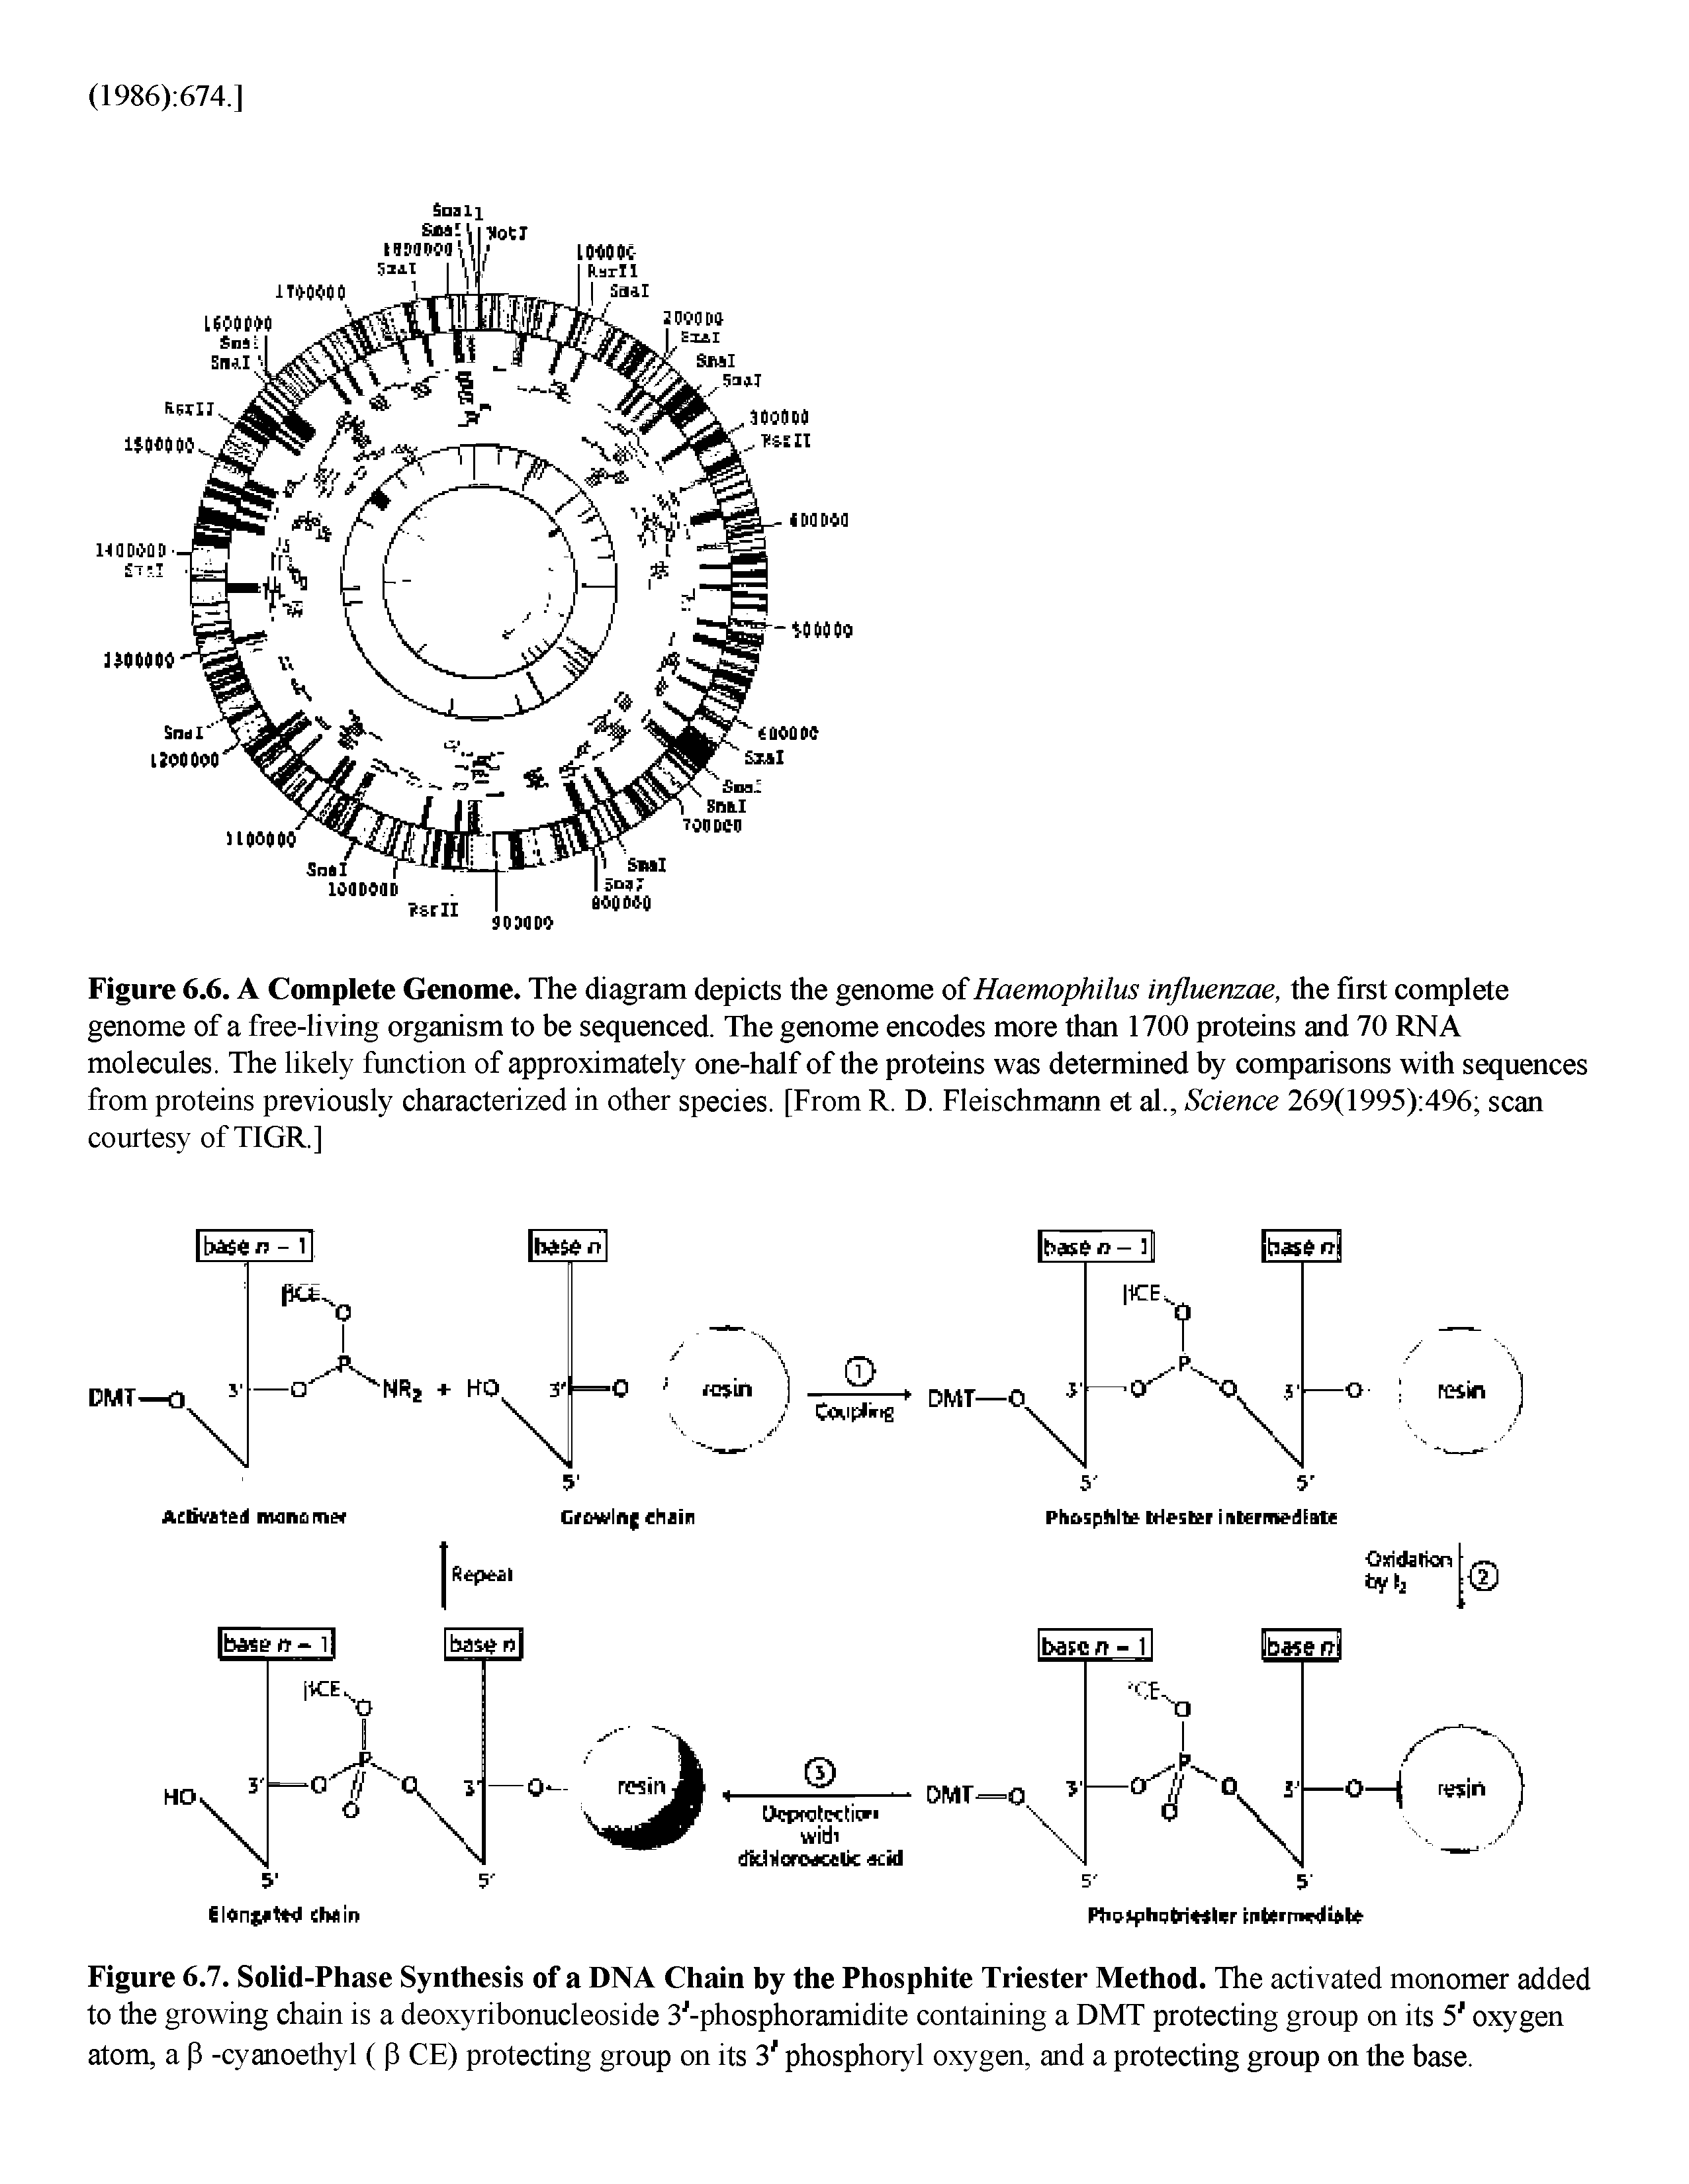 Figure 6.7. Solid-Phase Synthesis of a DNA Chain by the Phosphite Triester Method. The activated monomer added to the growing chain is a deoxyribonucleoside 3 -phosphoramidite containing a DMT protecting group on its 5 oxygen atom, a p -cyanoethyl ( p CE) protecting group on its 3 phosphoryl oxygen, and a protecting group on the base.